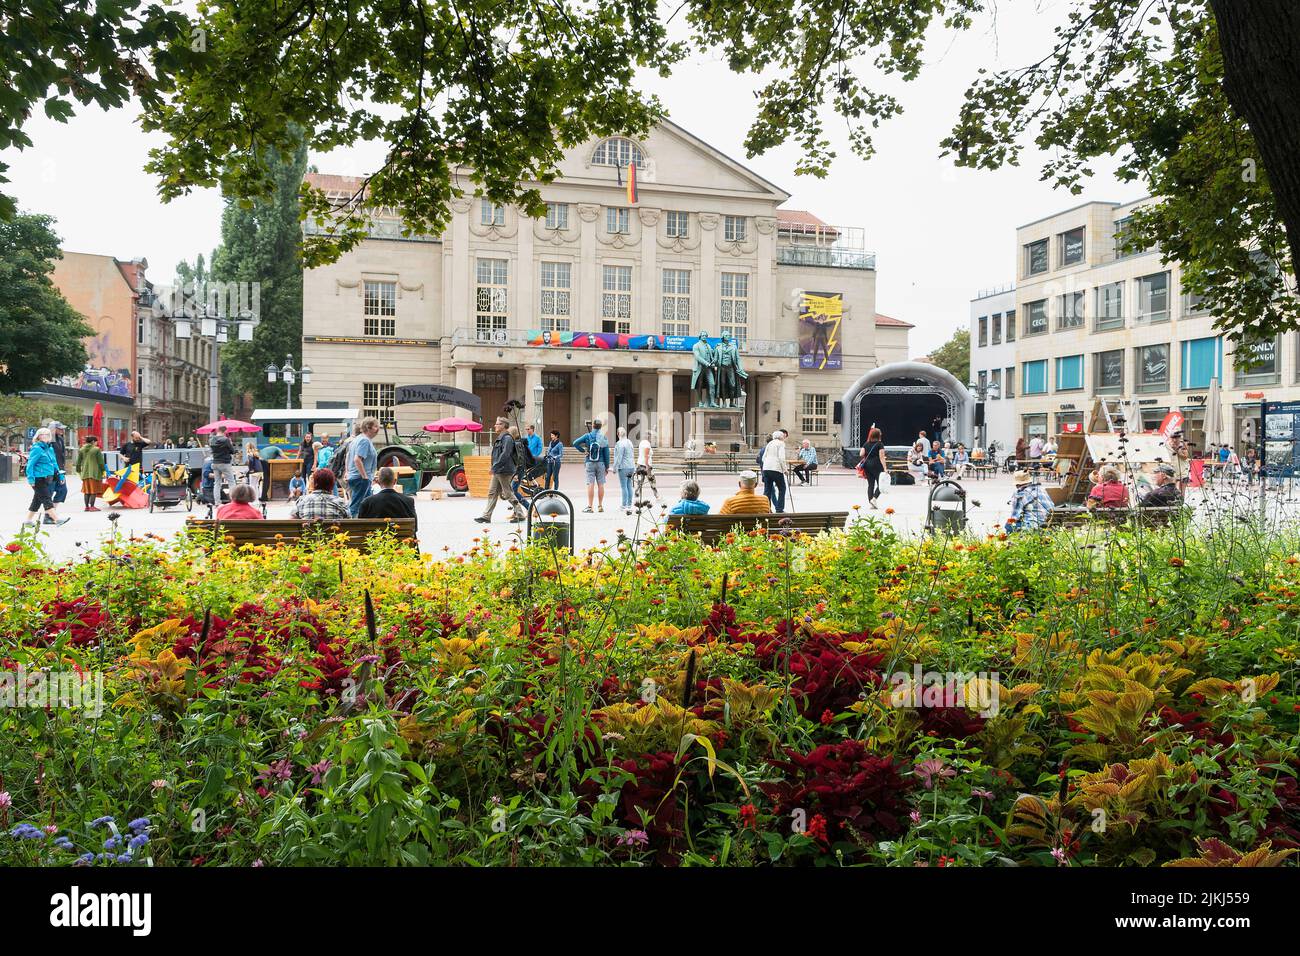 Weimar, Thuringia, theater square, German National Theater, people, street scene Stock Photo